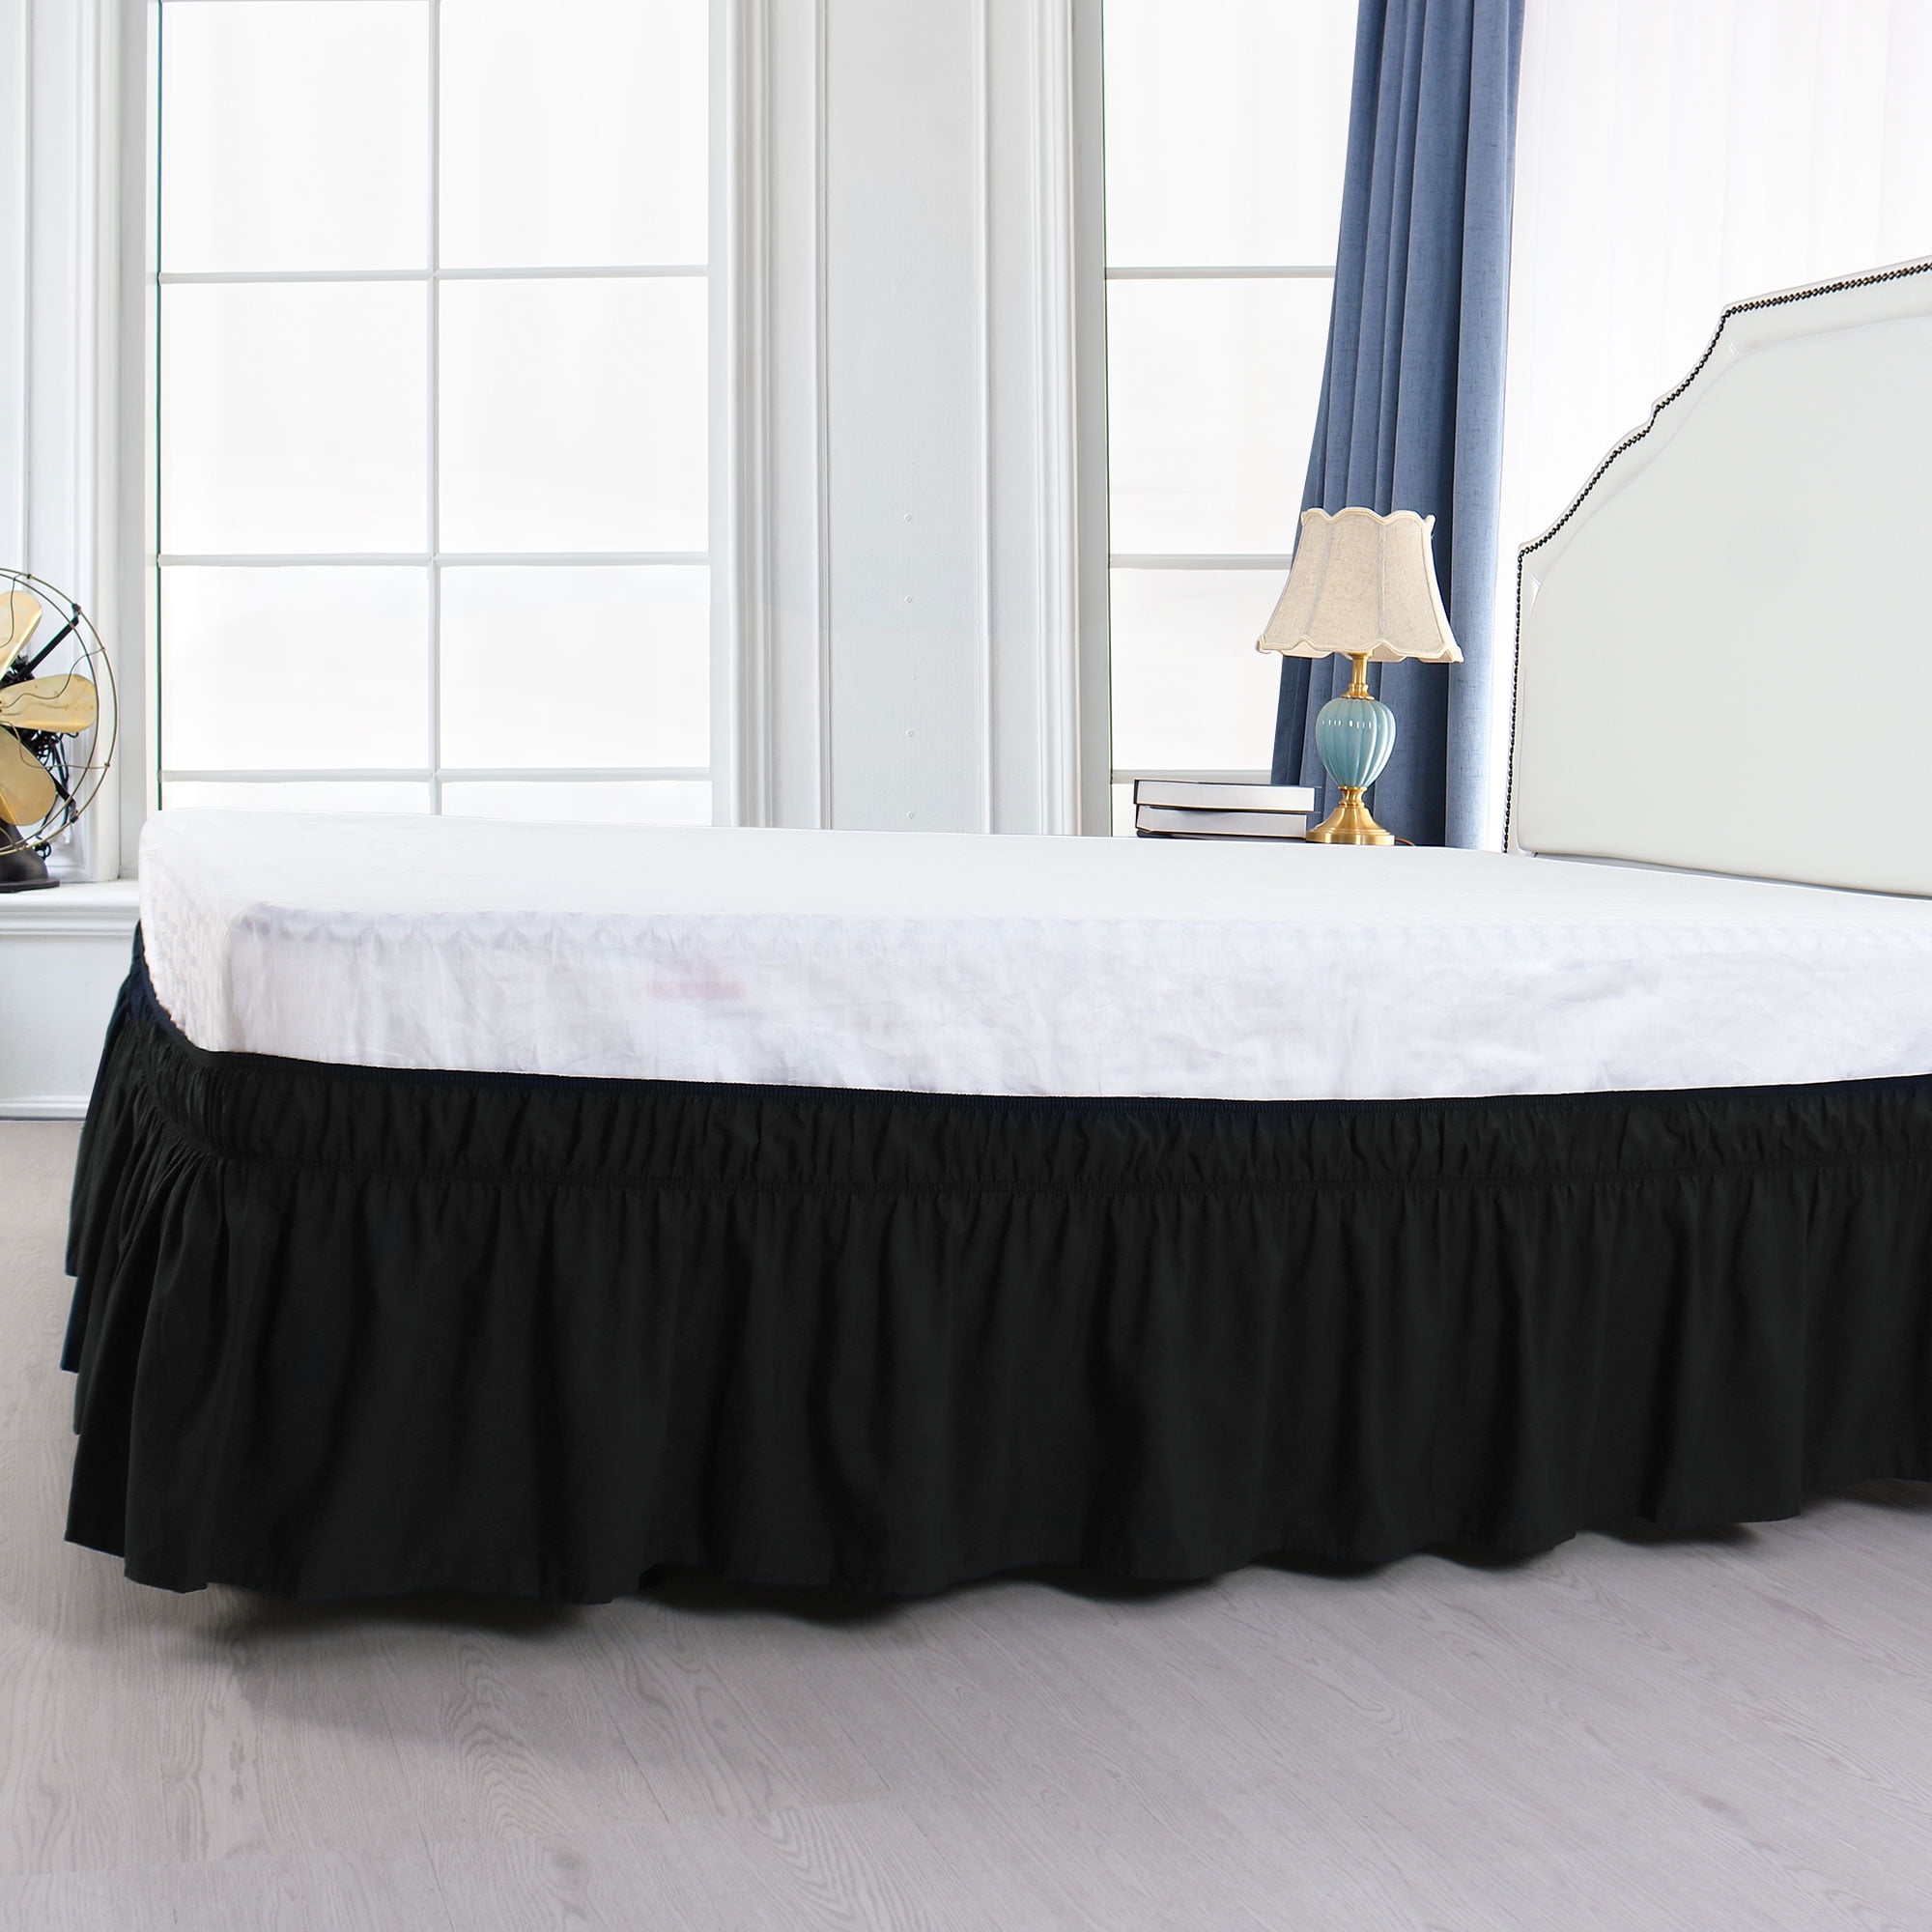 Details about   Dust Ruffle BedSkirt Cotton Bed Wrap with Platform Fit Gathered Style Light Grey 